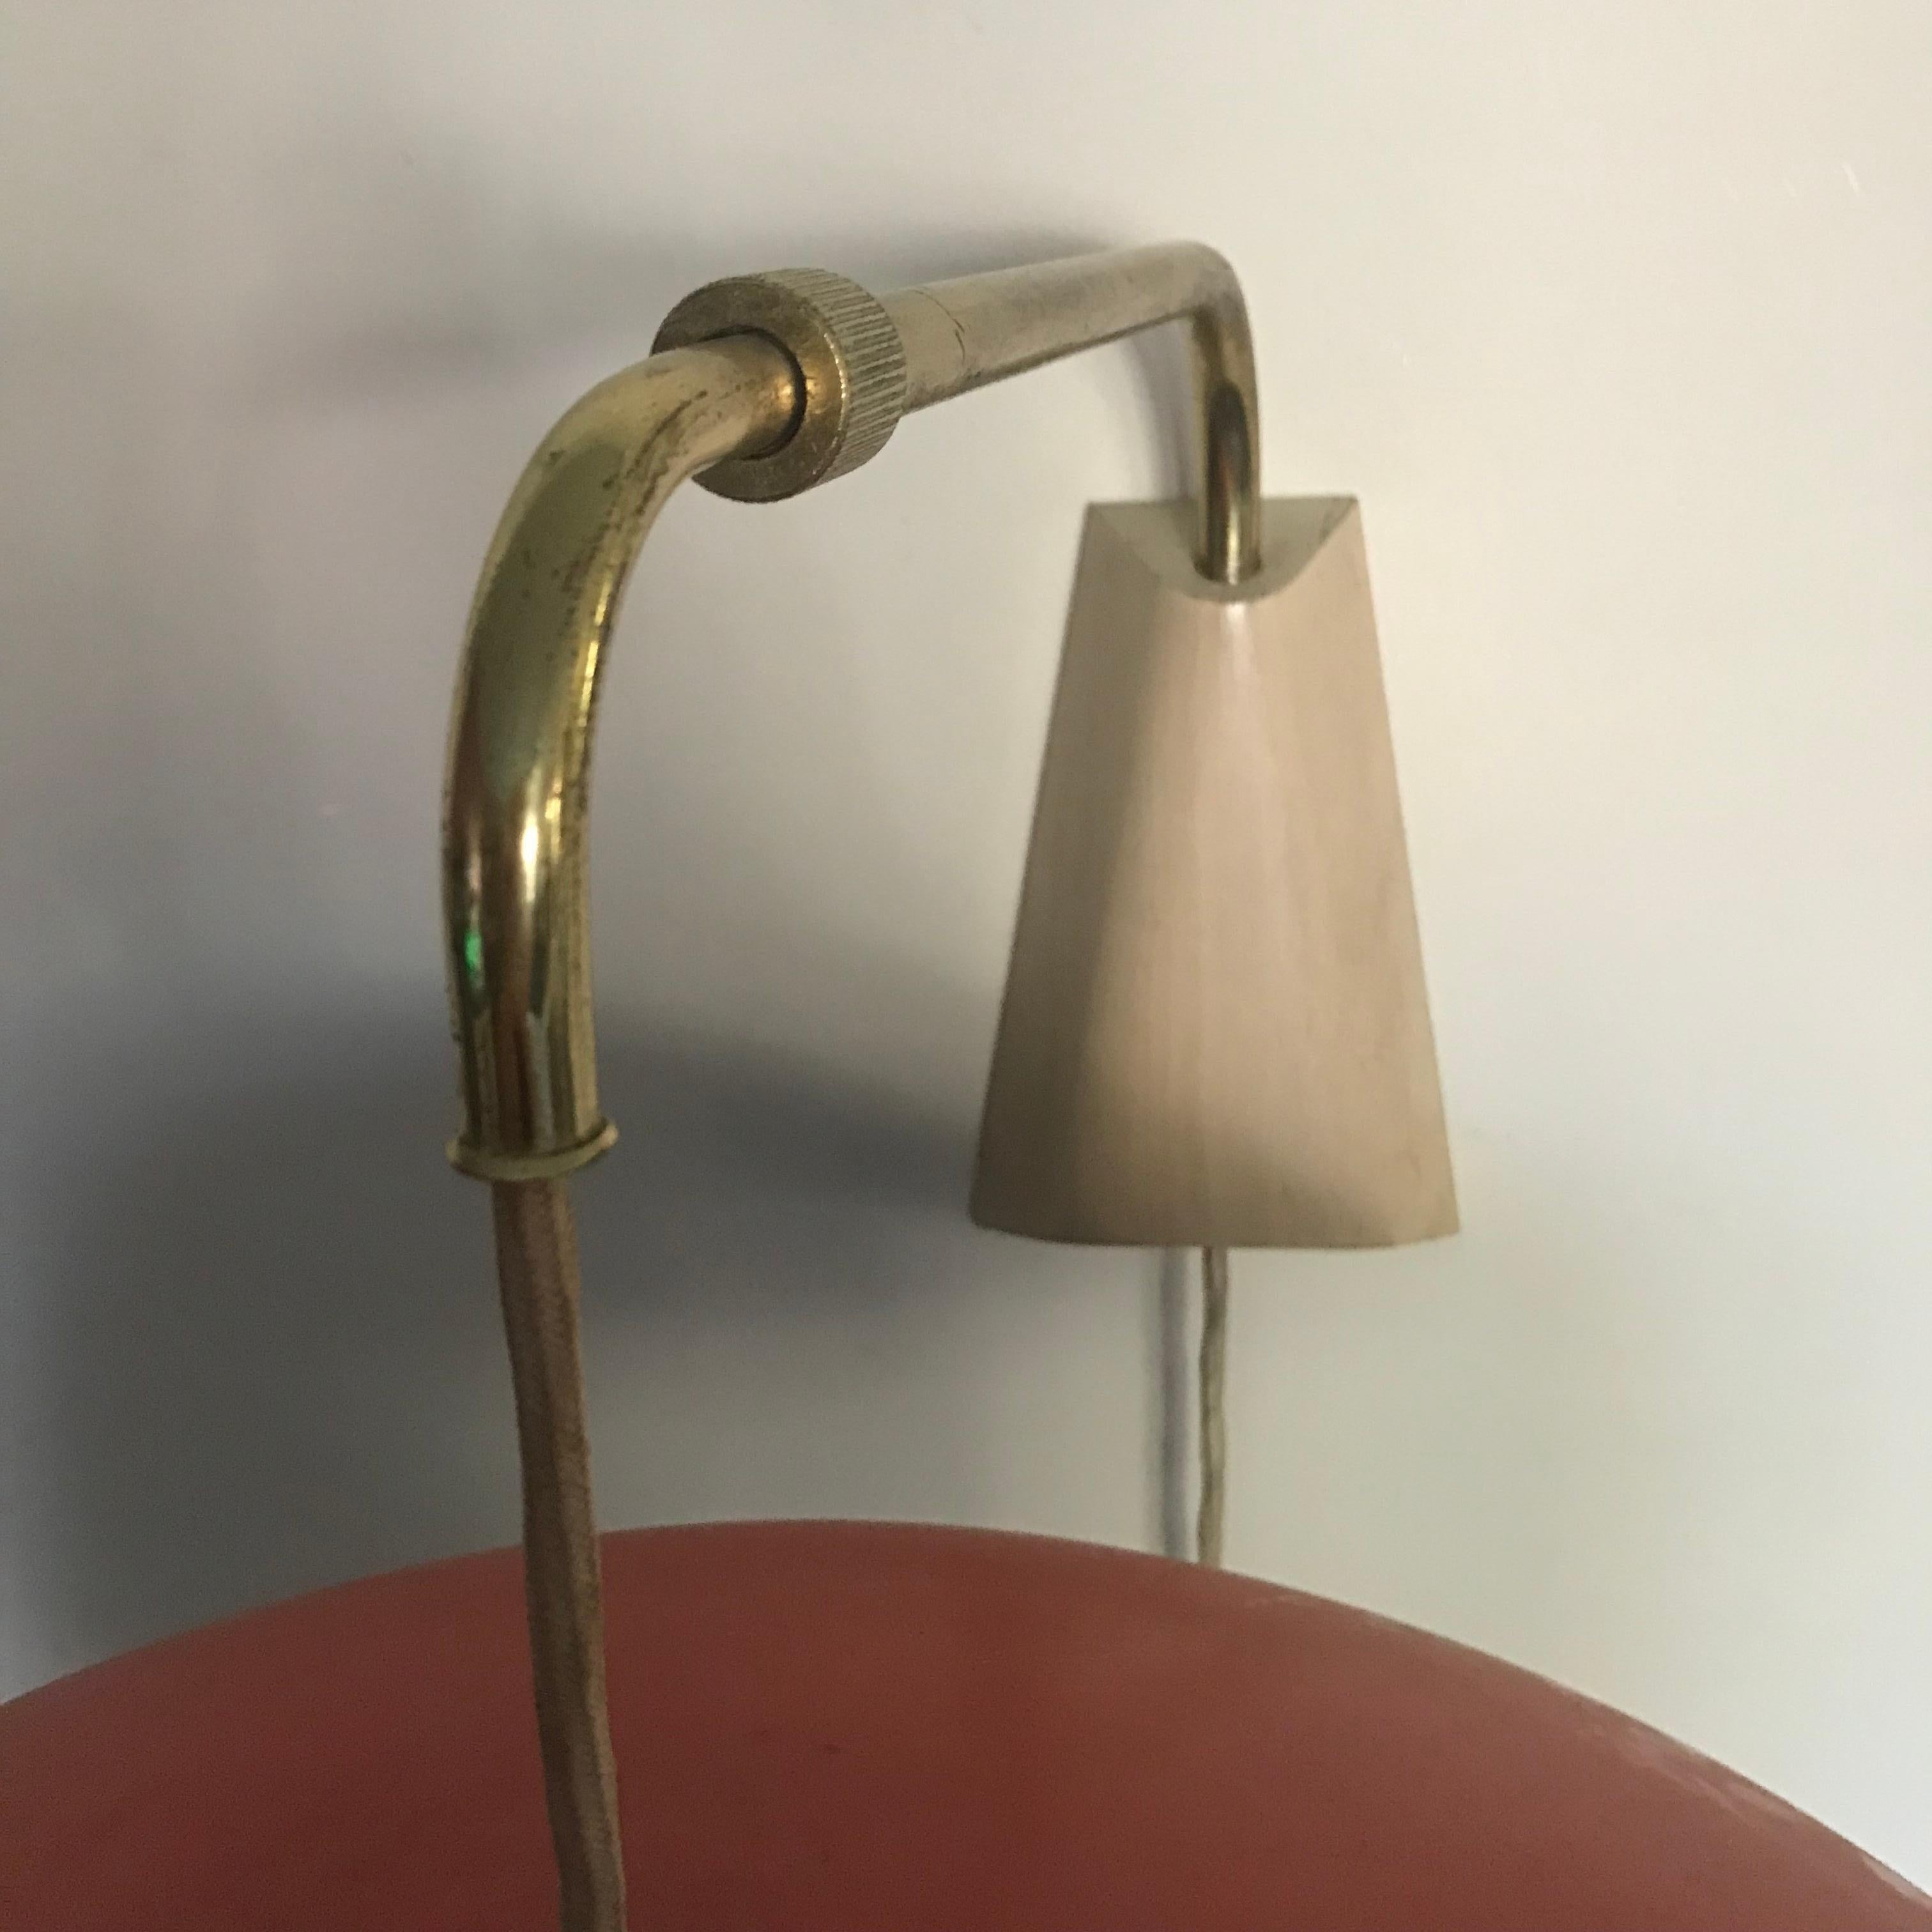 Original Gerald Thurston for Lightolier domed metal wall hanging reading light. The sleek design consists of a Brass articulating arm with integrated pulley system.